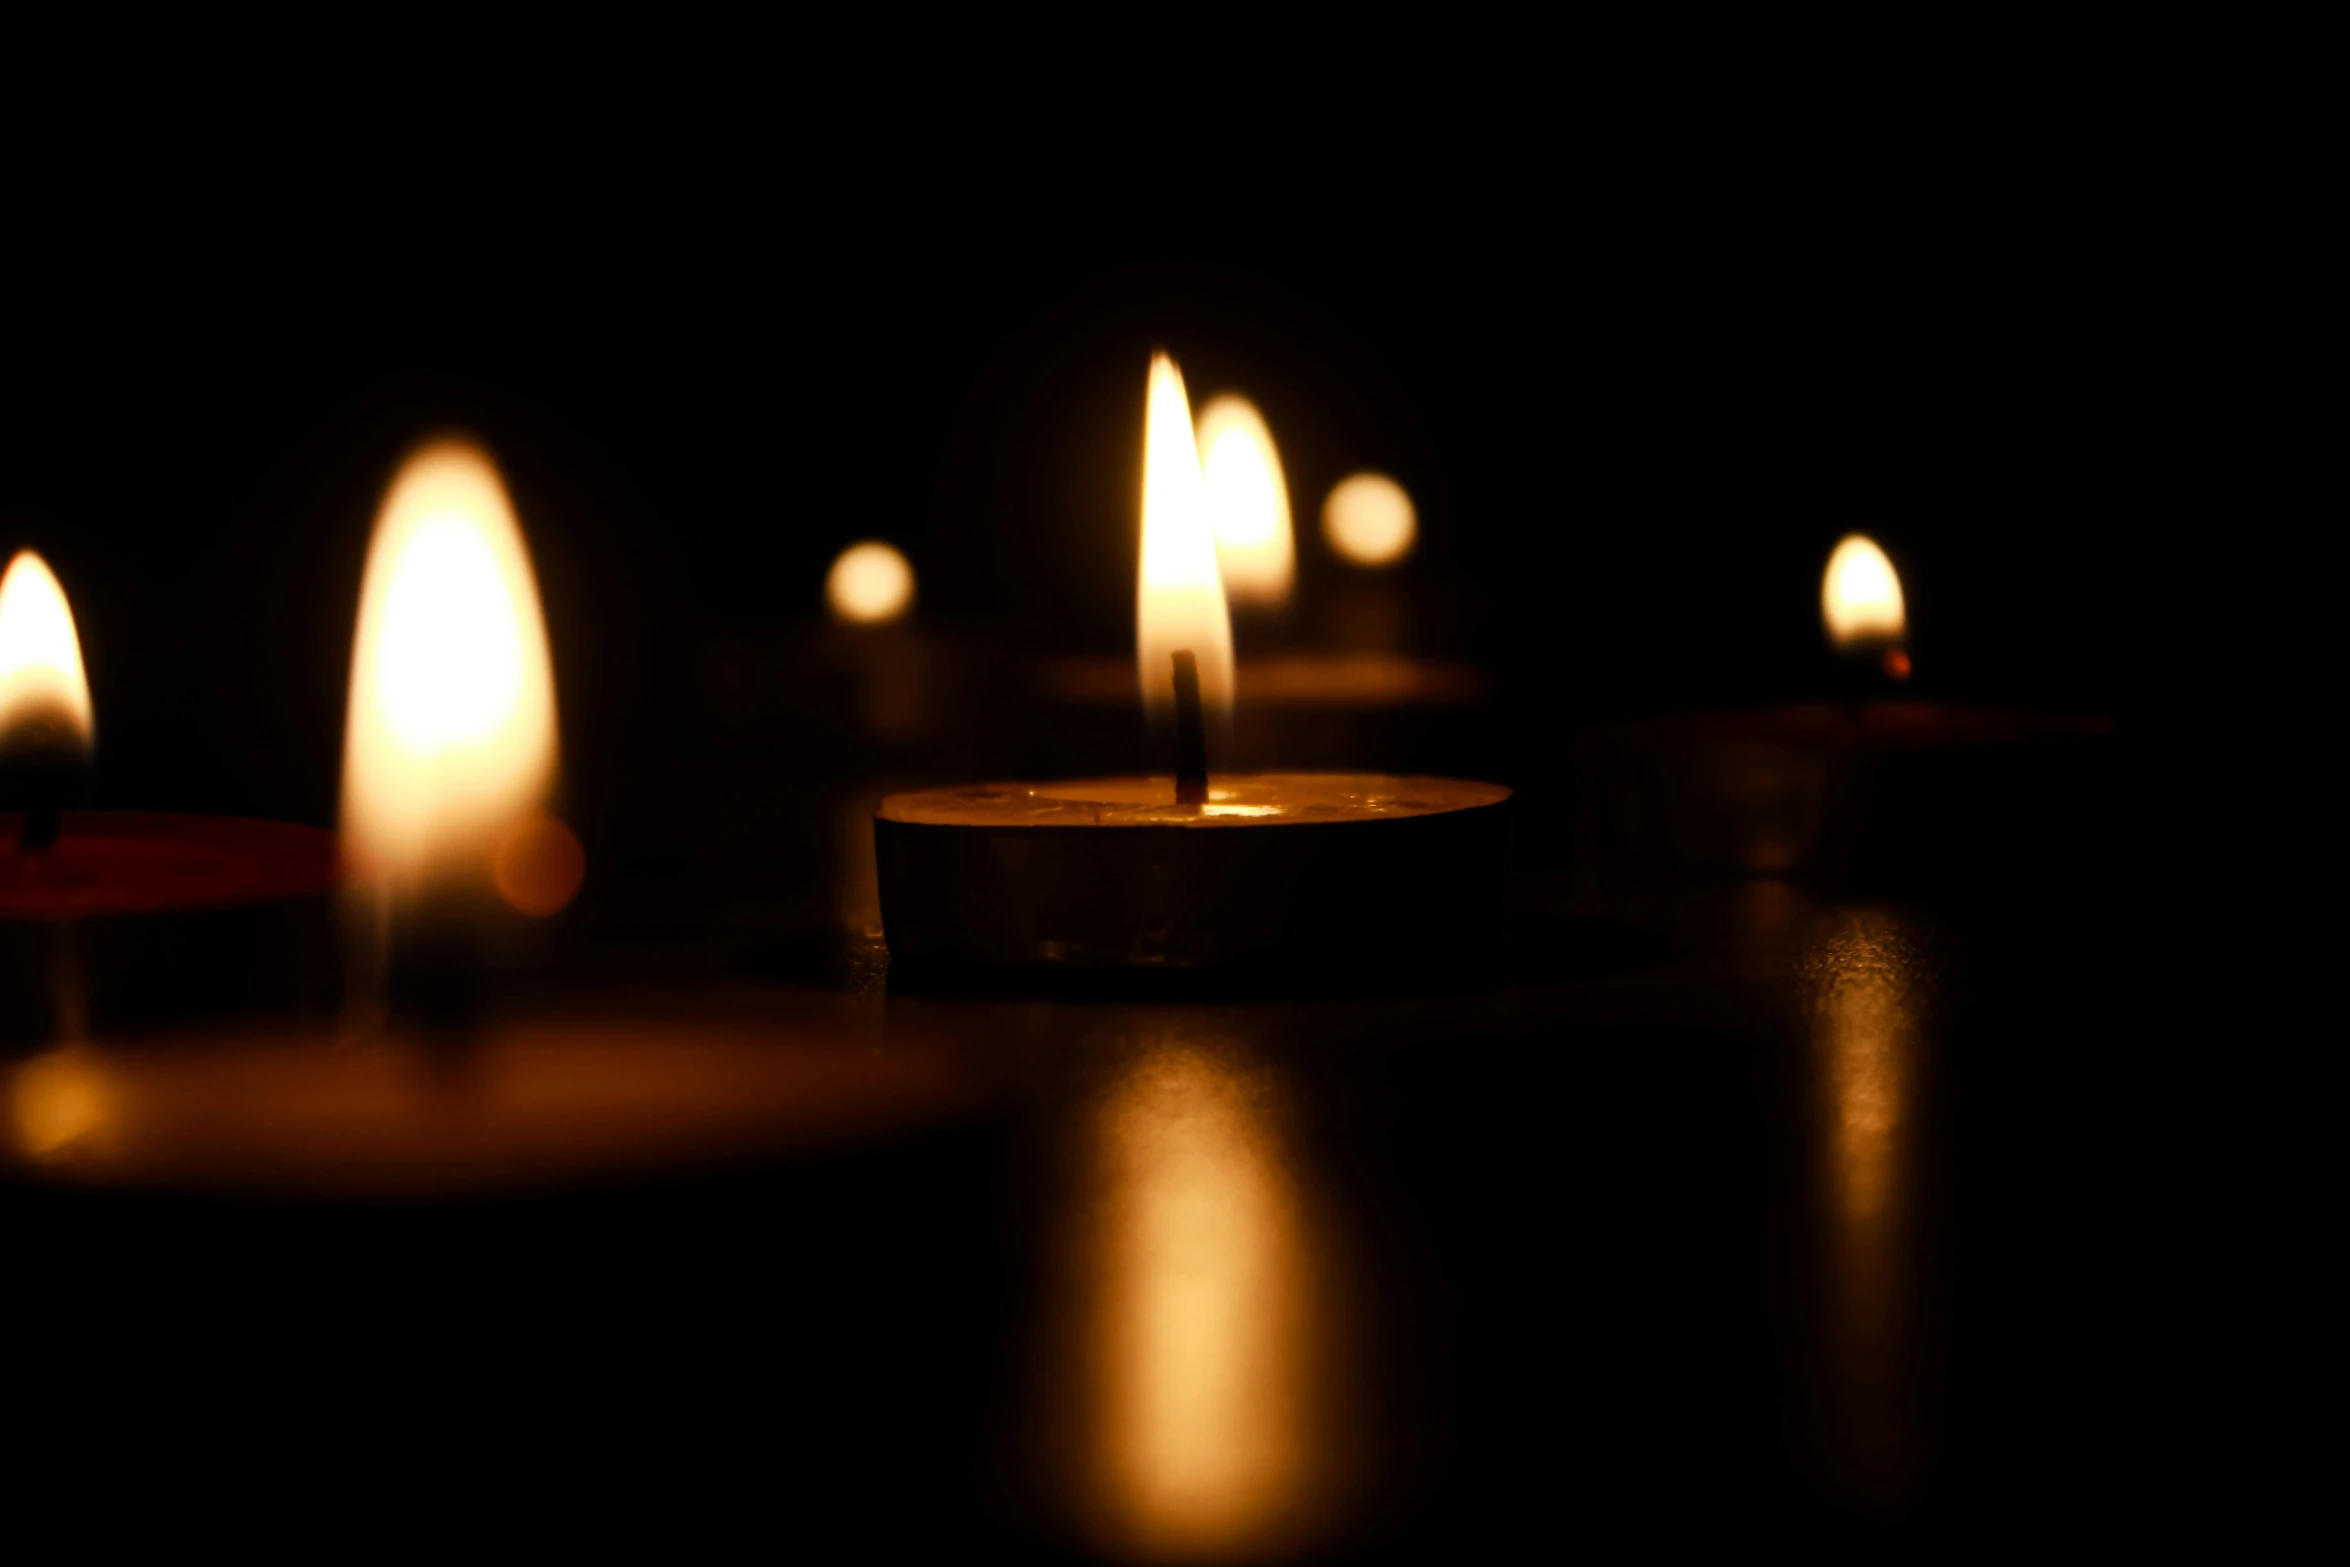 a group of lit candles sitting on top of a table, with a black background, lynn skordal, lit from the side, calm feeling